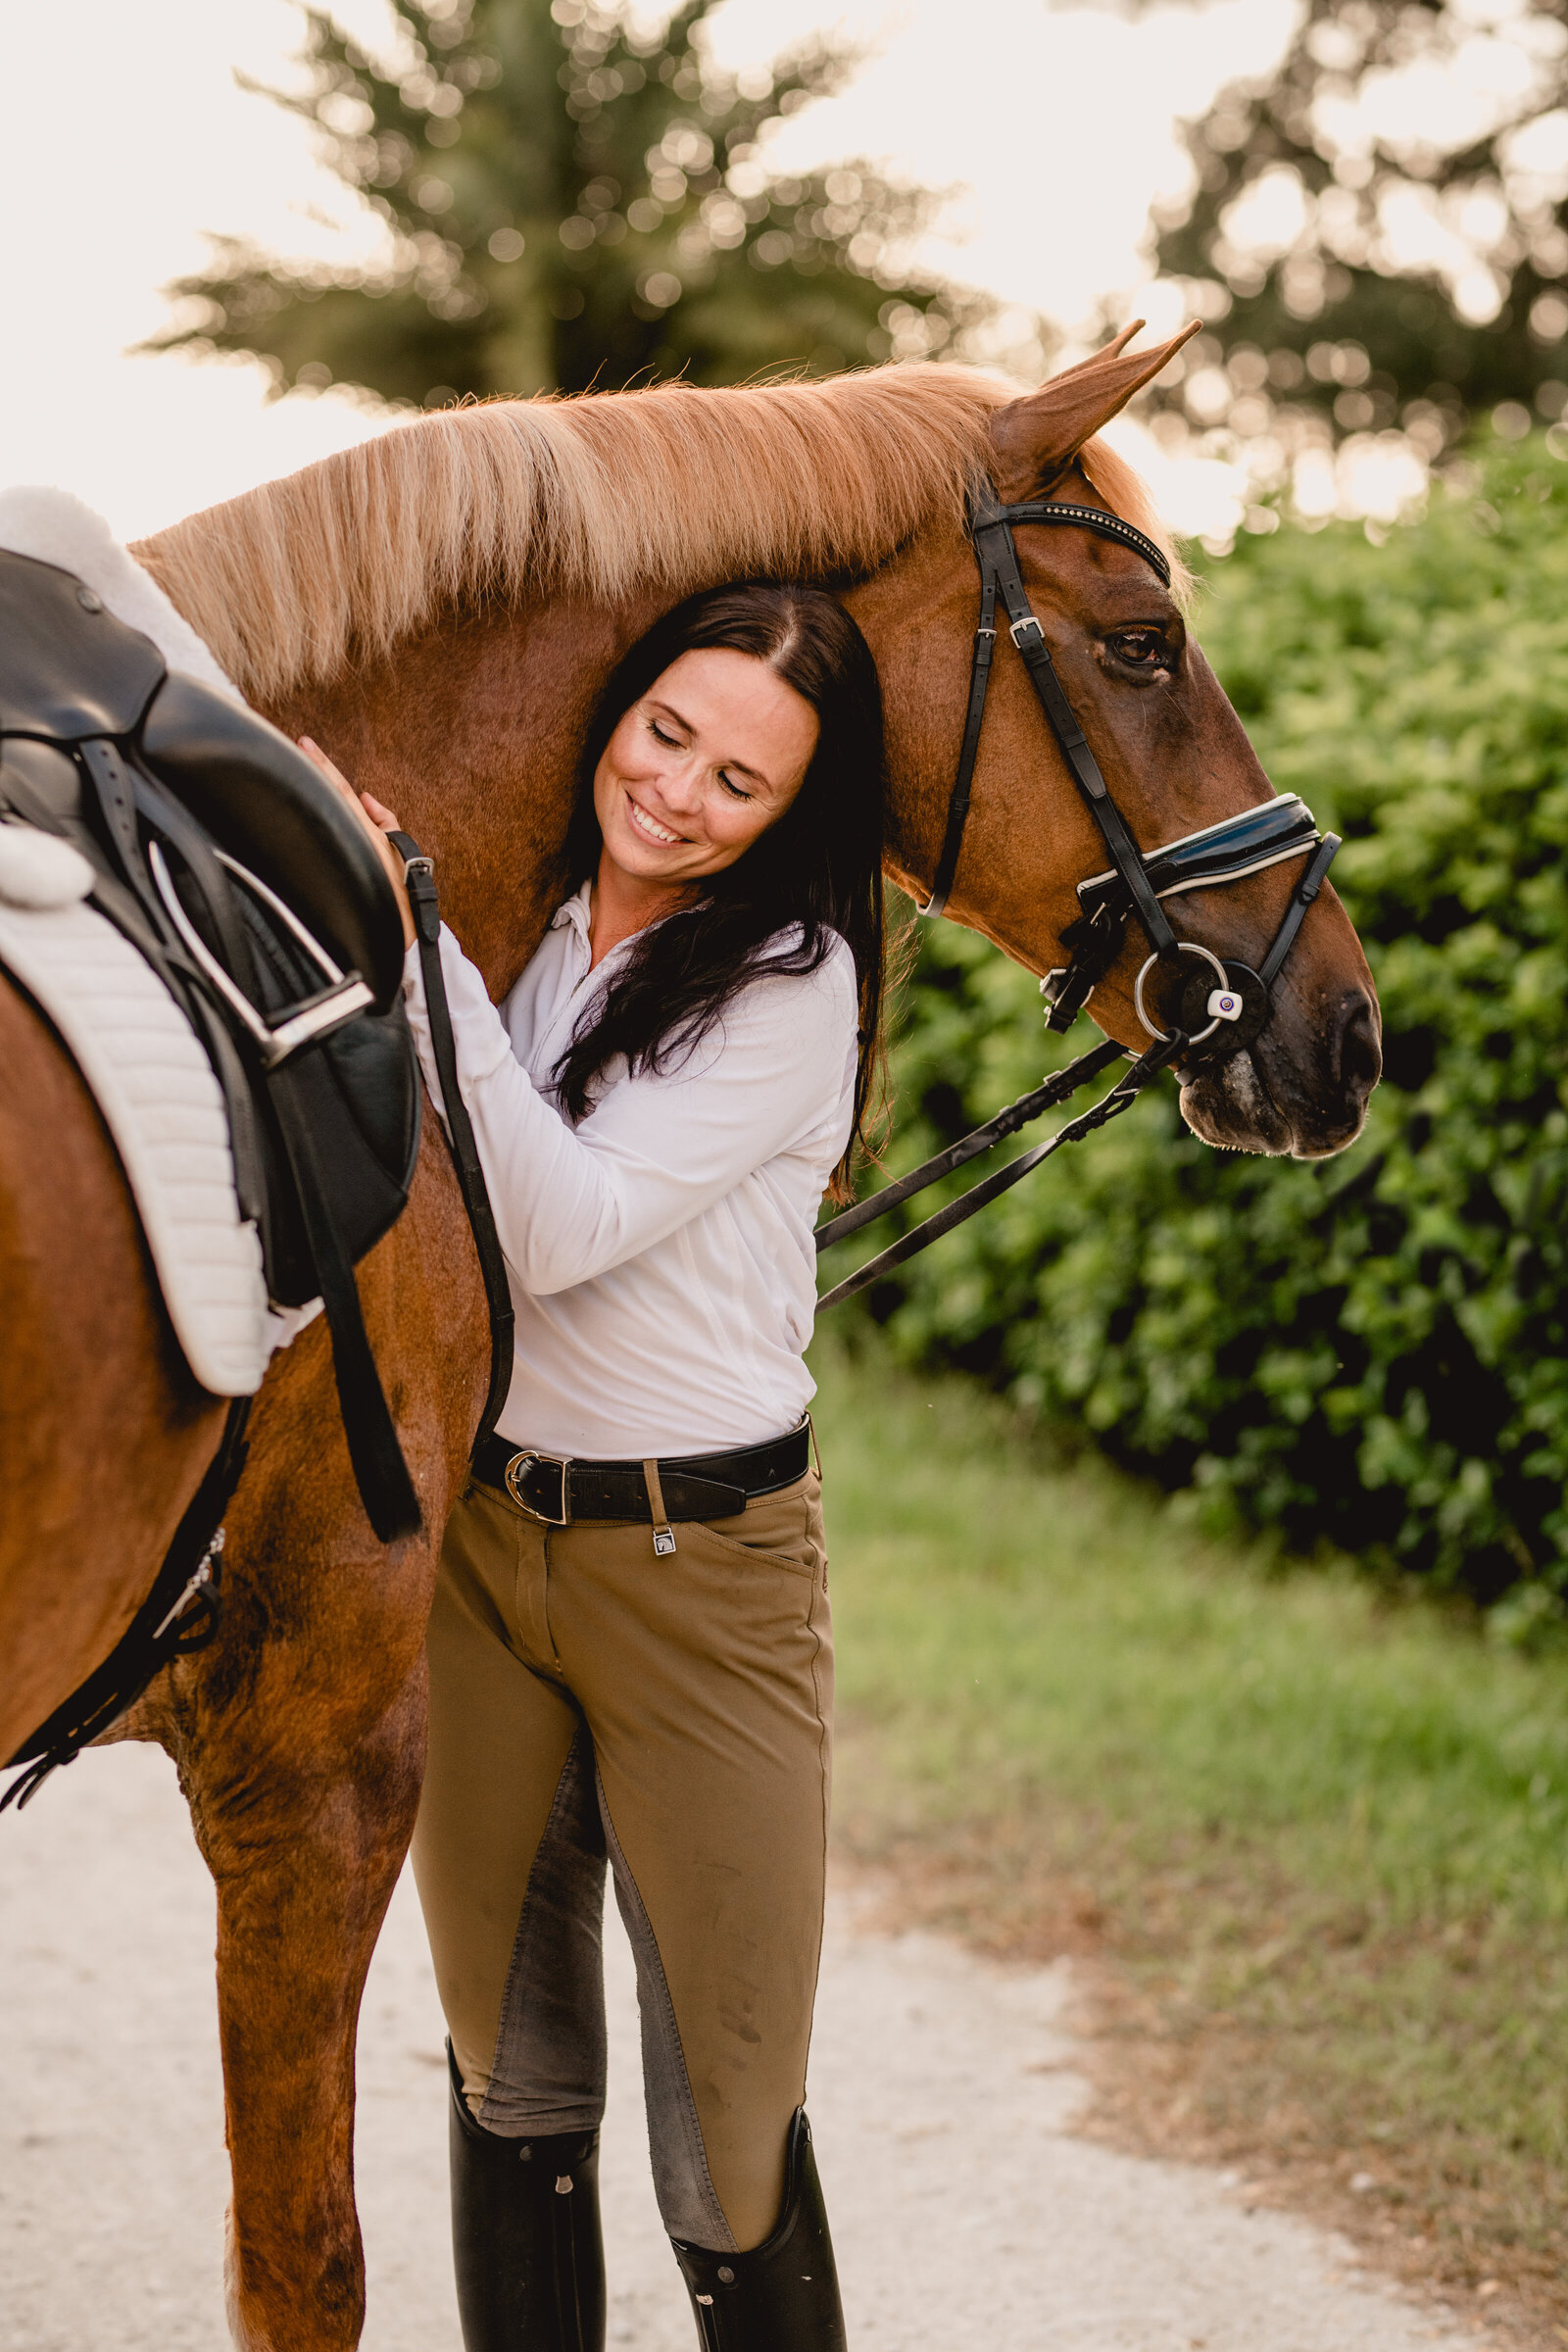 Dressage horse and rider in Ocala, Florida.